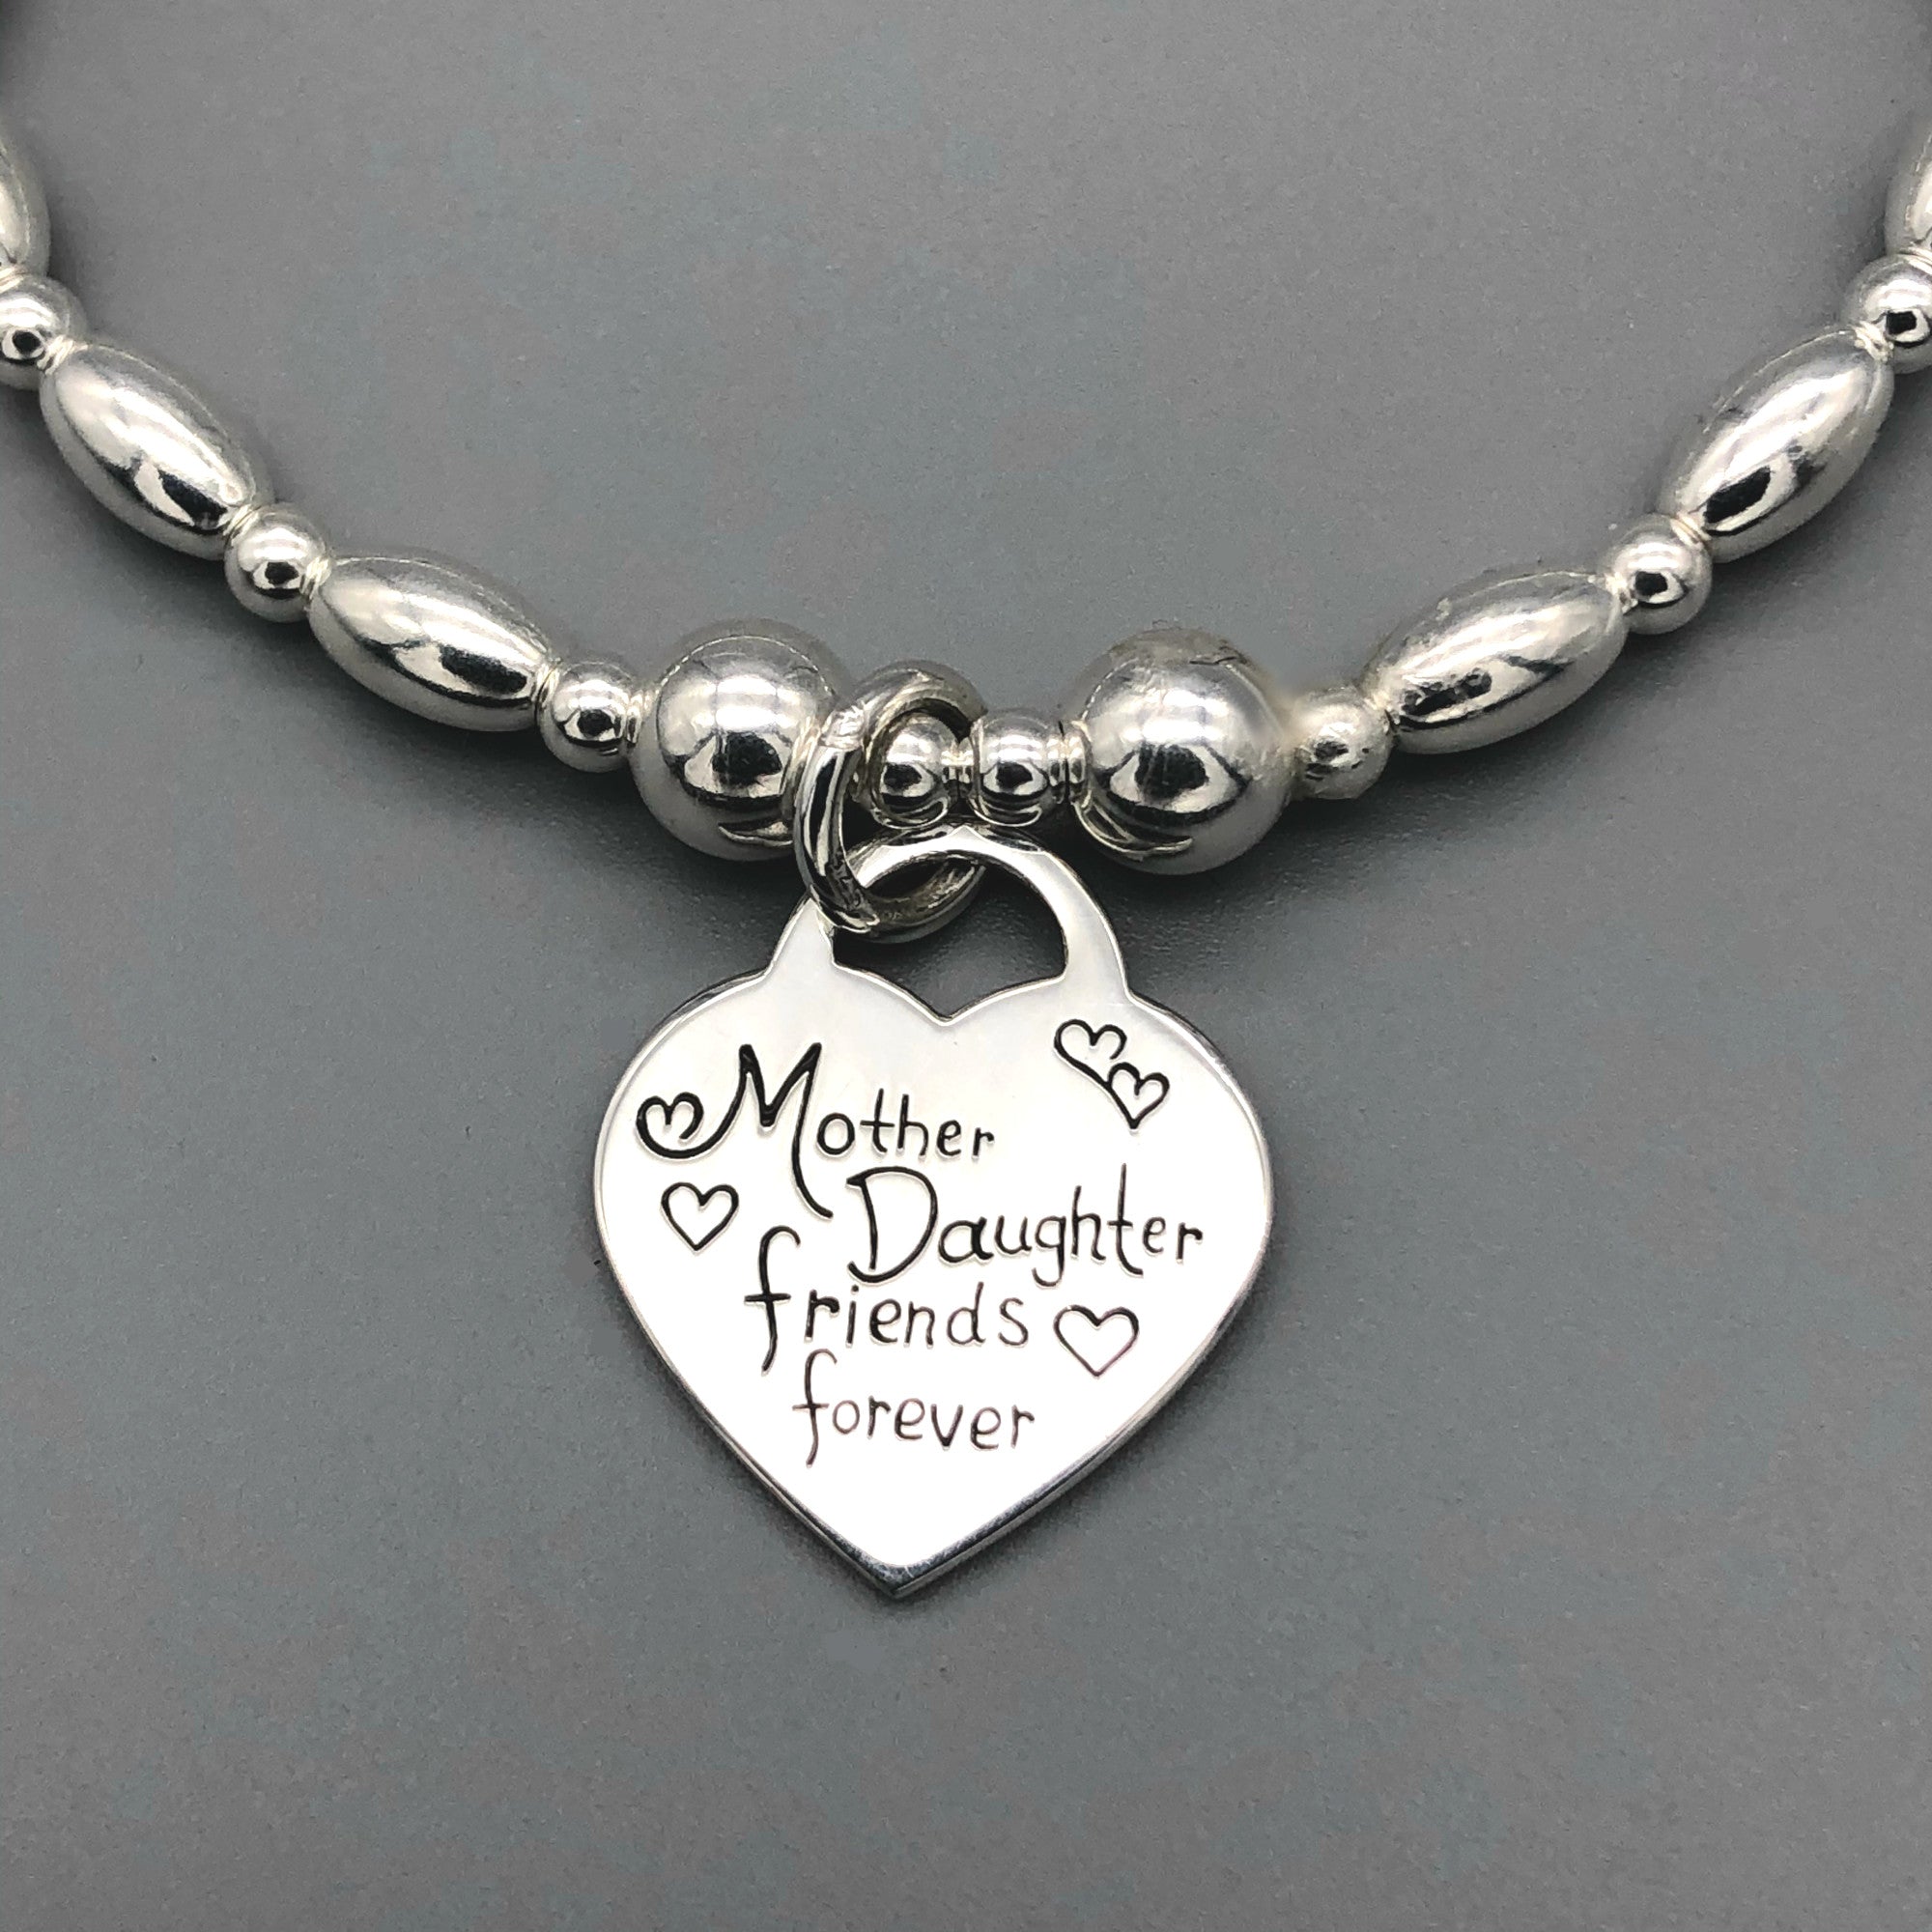 Mother Daughter Friends Forever charm stack bracelet  My Silver Wish